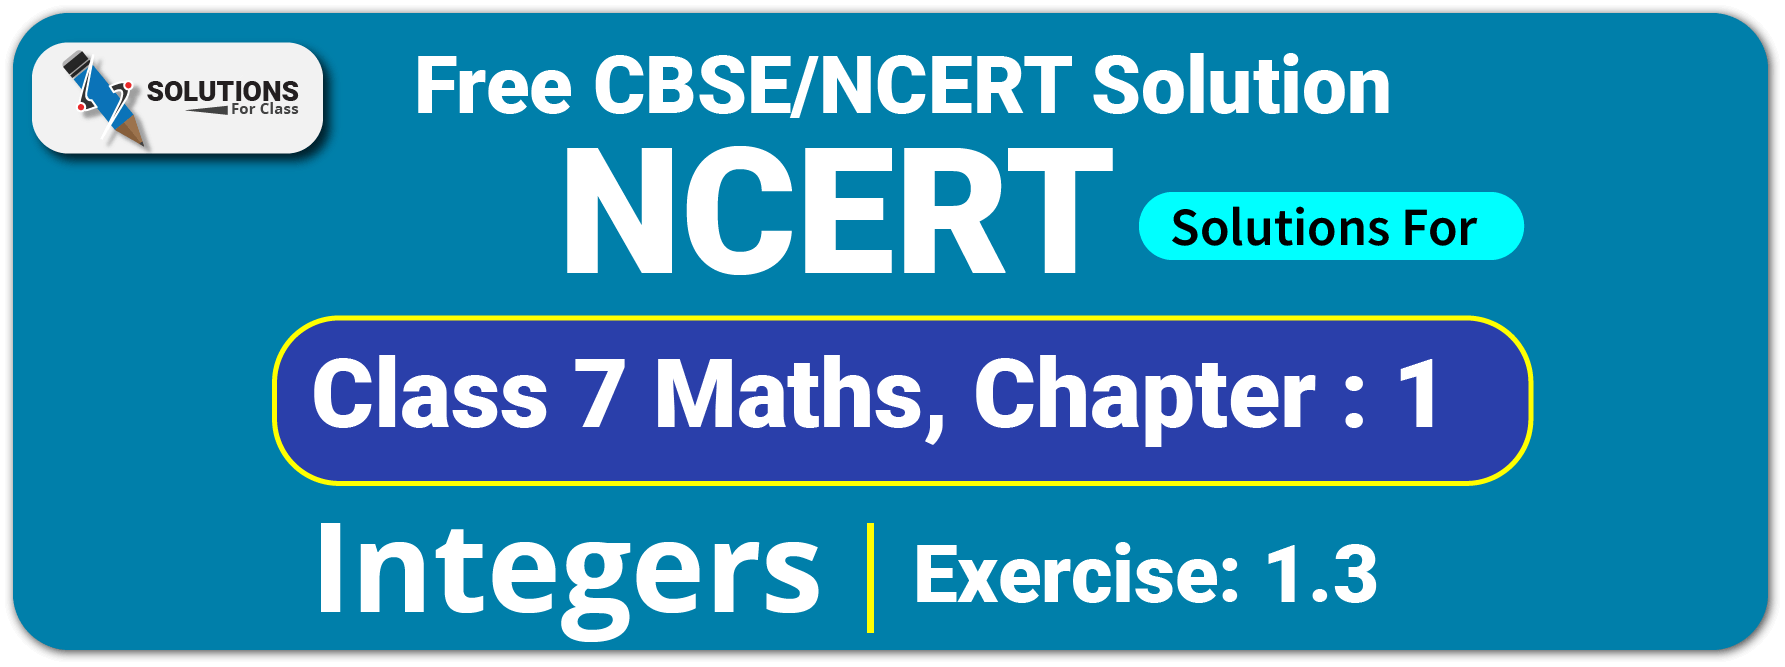 NCERT Solutions For Class 7 Chapter 1, Integers , Exercise 1.3